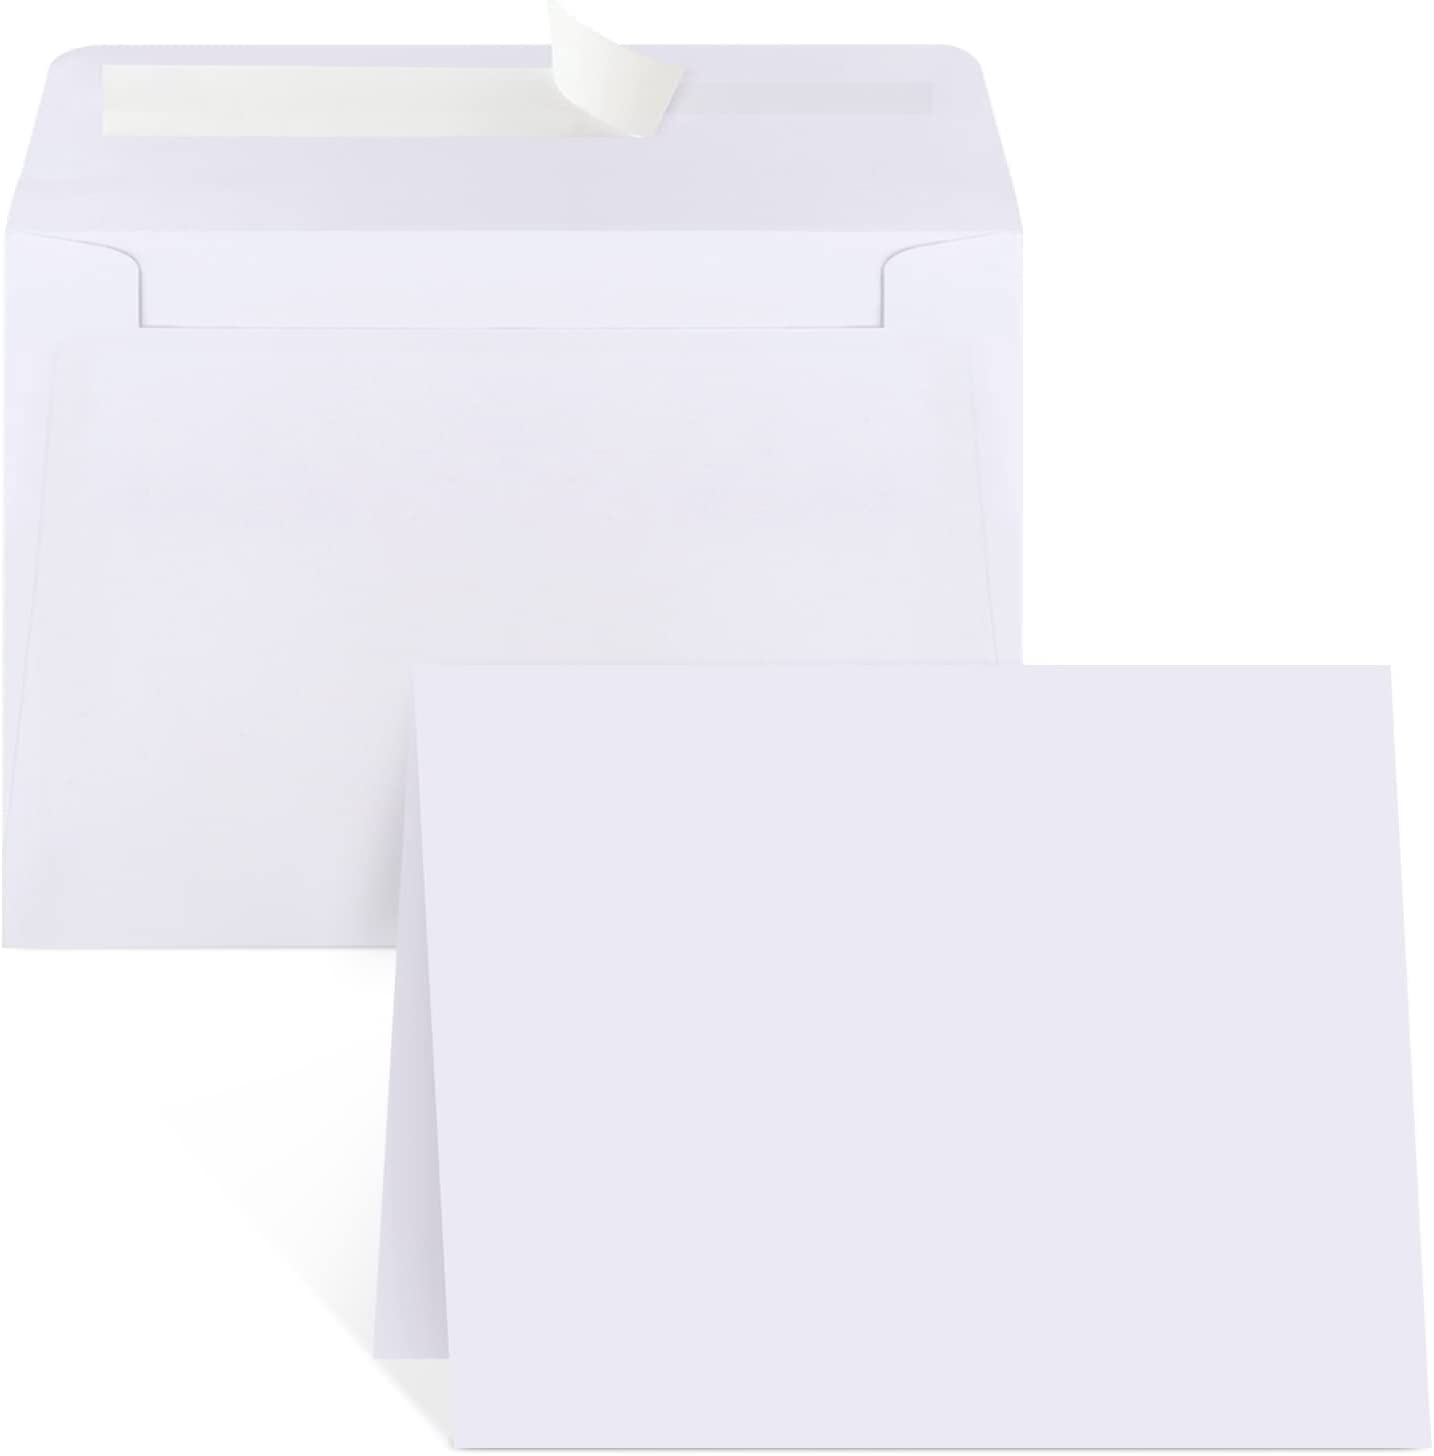 100 Pack Blank Cards and Envelopes 4x6, Bulk Kraft Paper Greeting Cards for  DIY Card Making, Wedding, Birthday, All Occasions